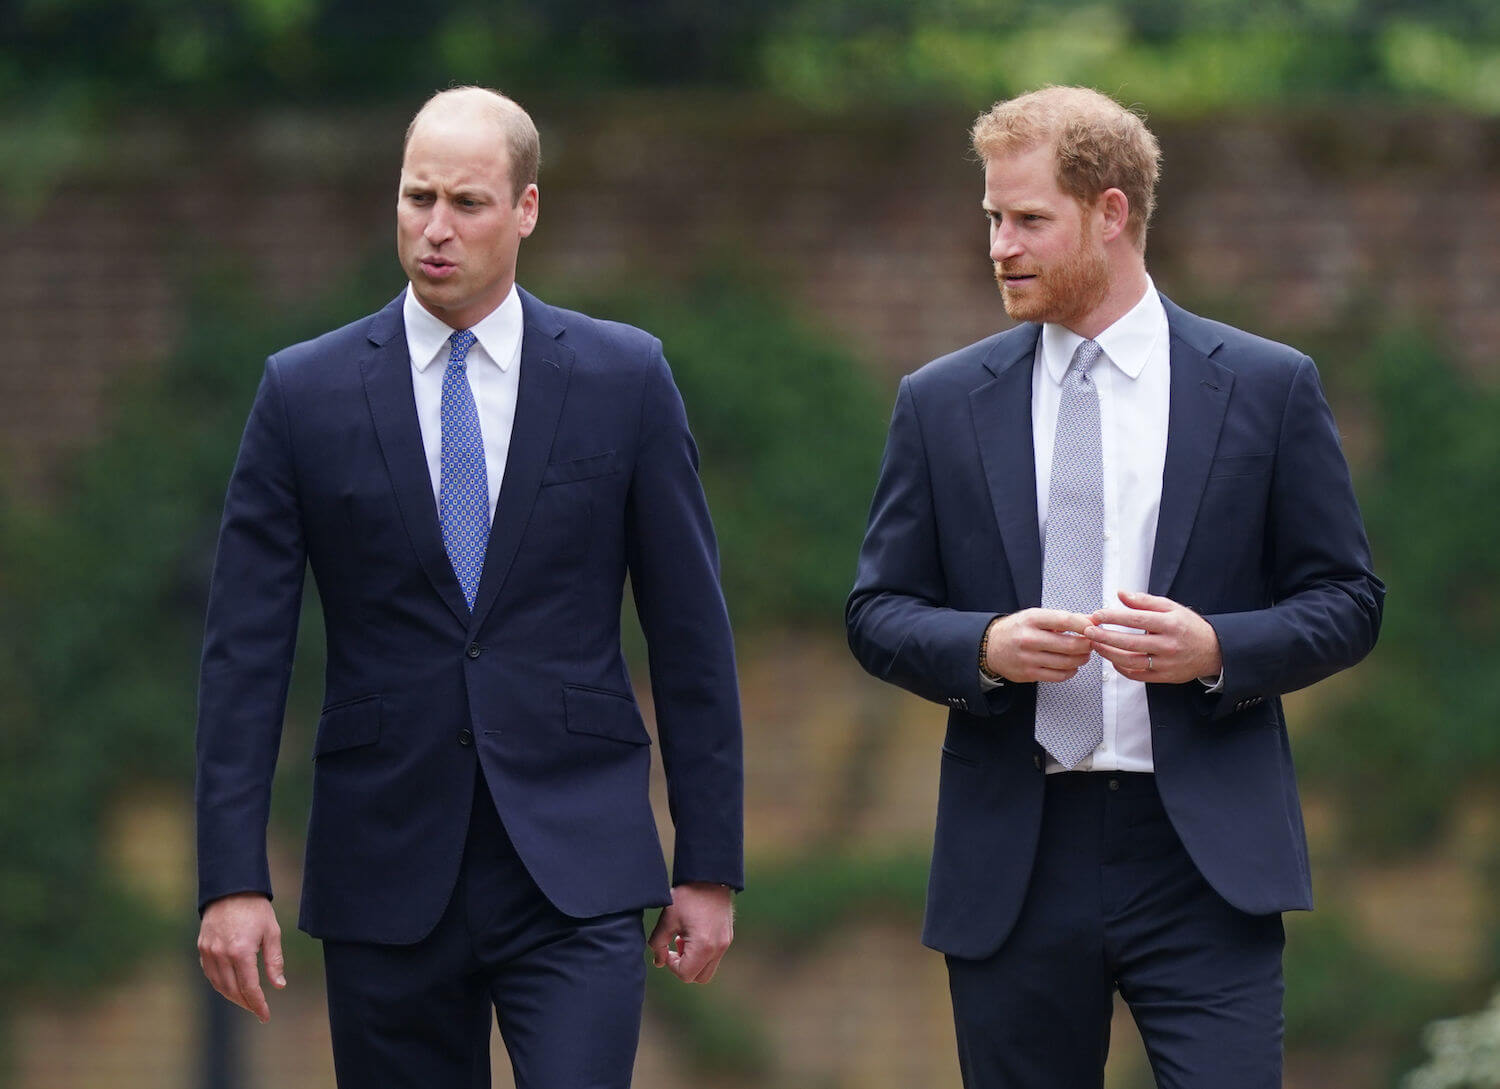 Prince William and Prince Harry’s Different Coronation Roles Will ‘Protect the Dignity’ of the Ceremony, Expert Says